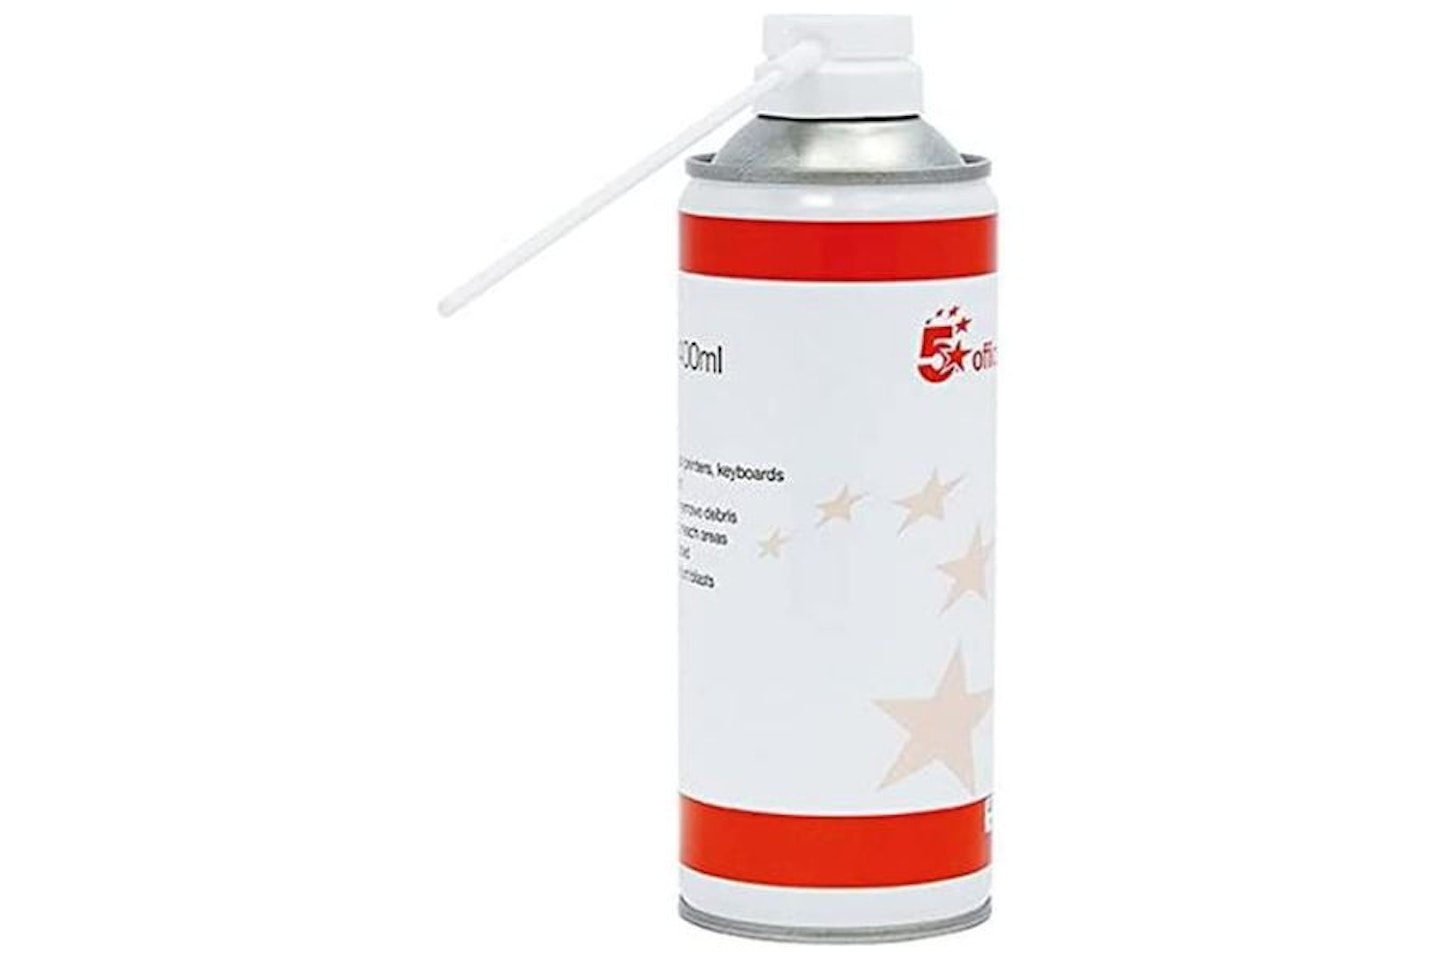 5 Star Spray Duster Can